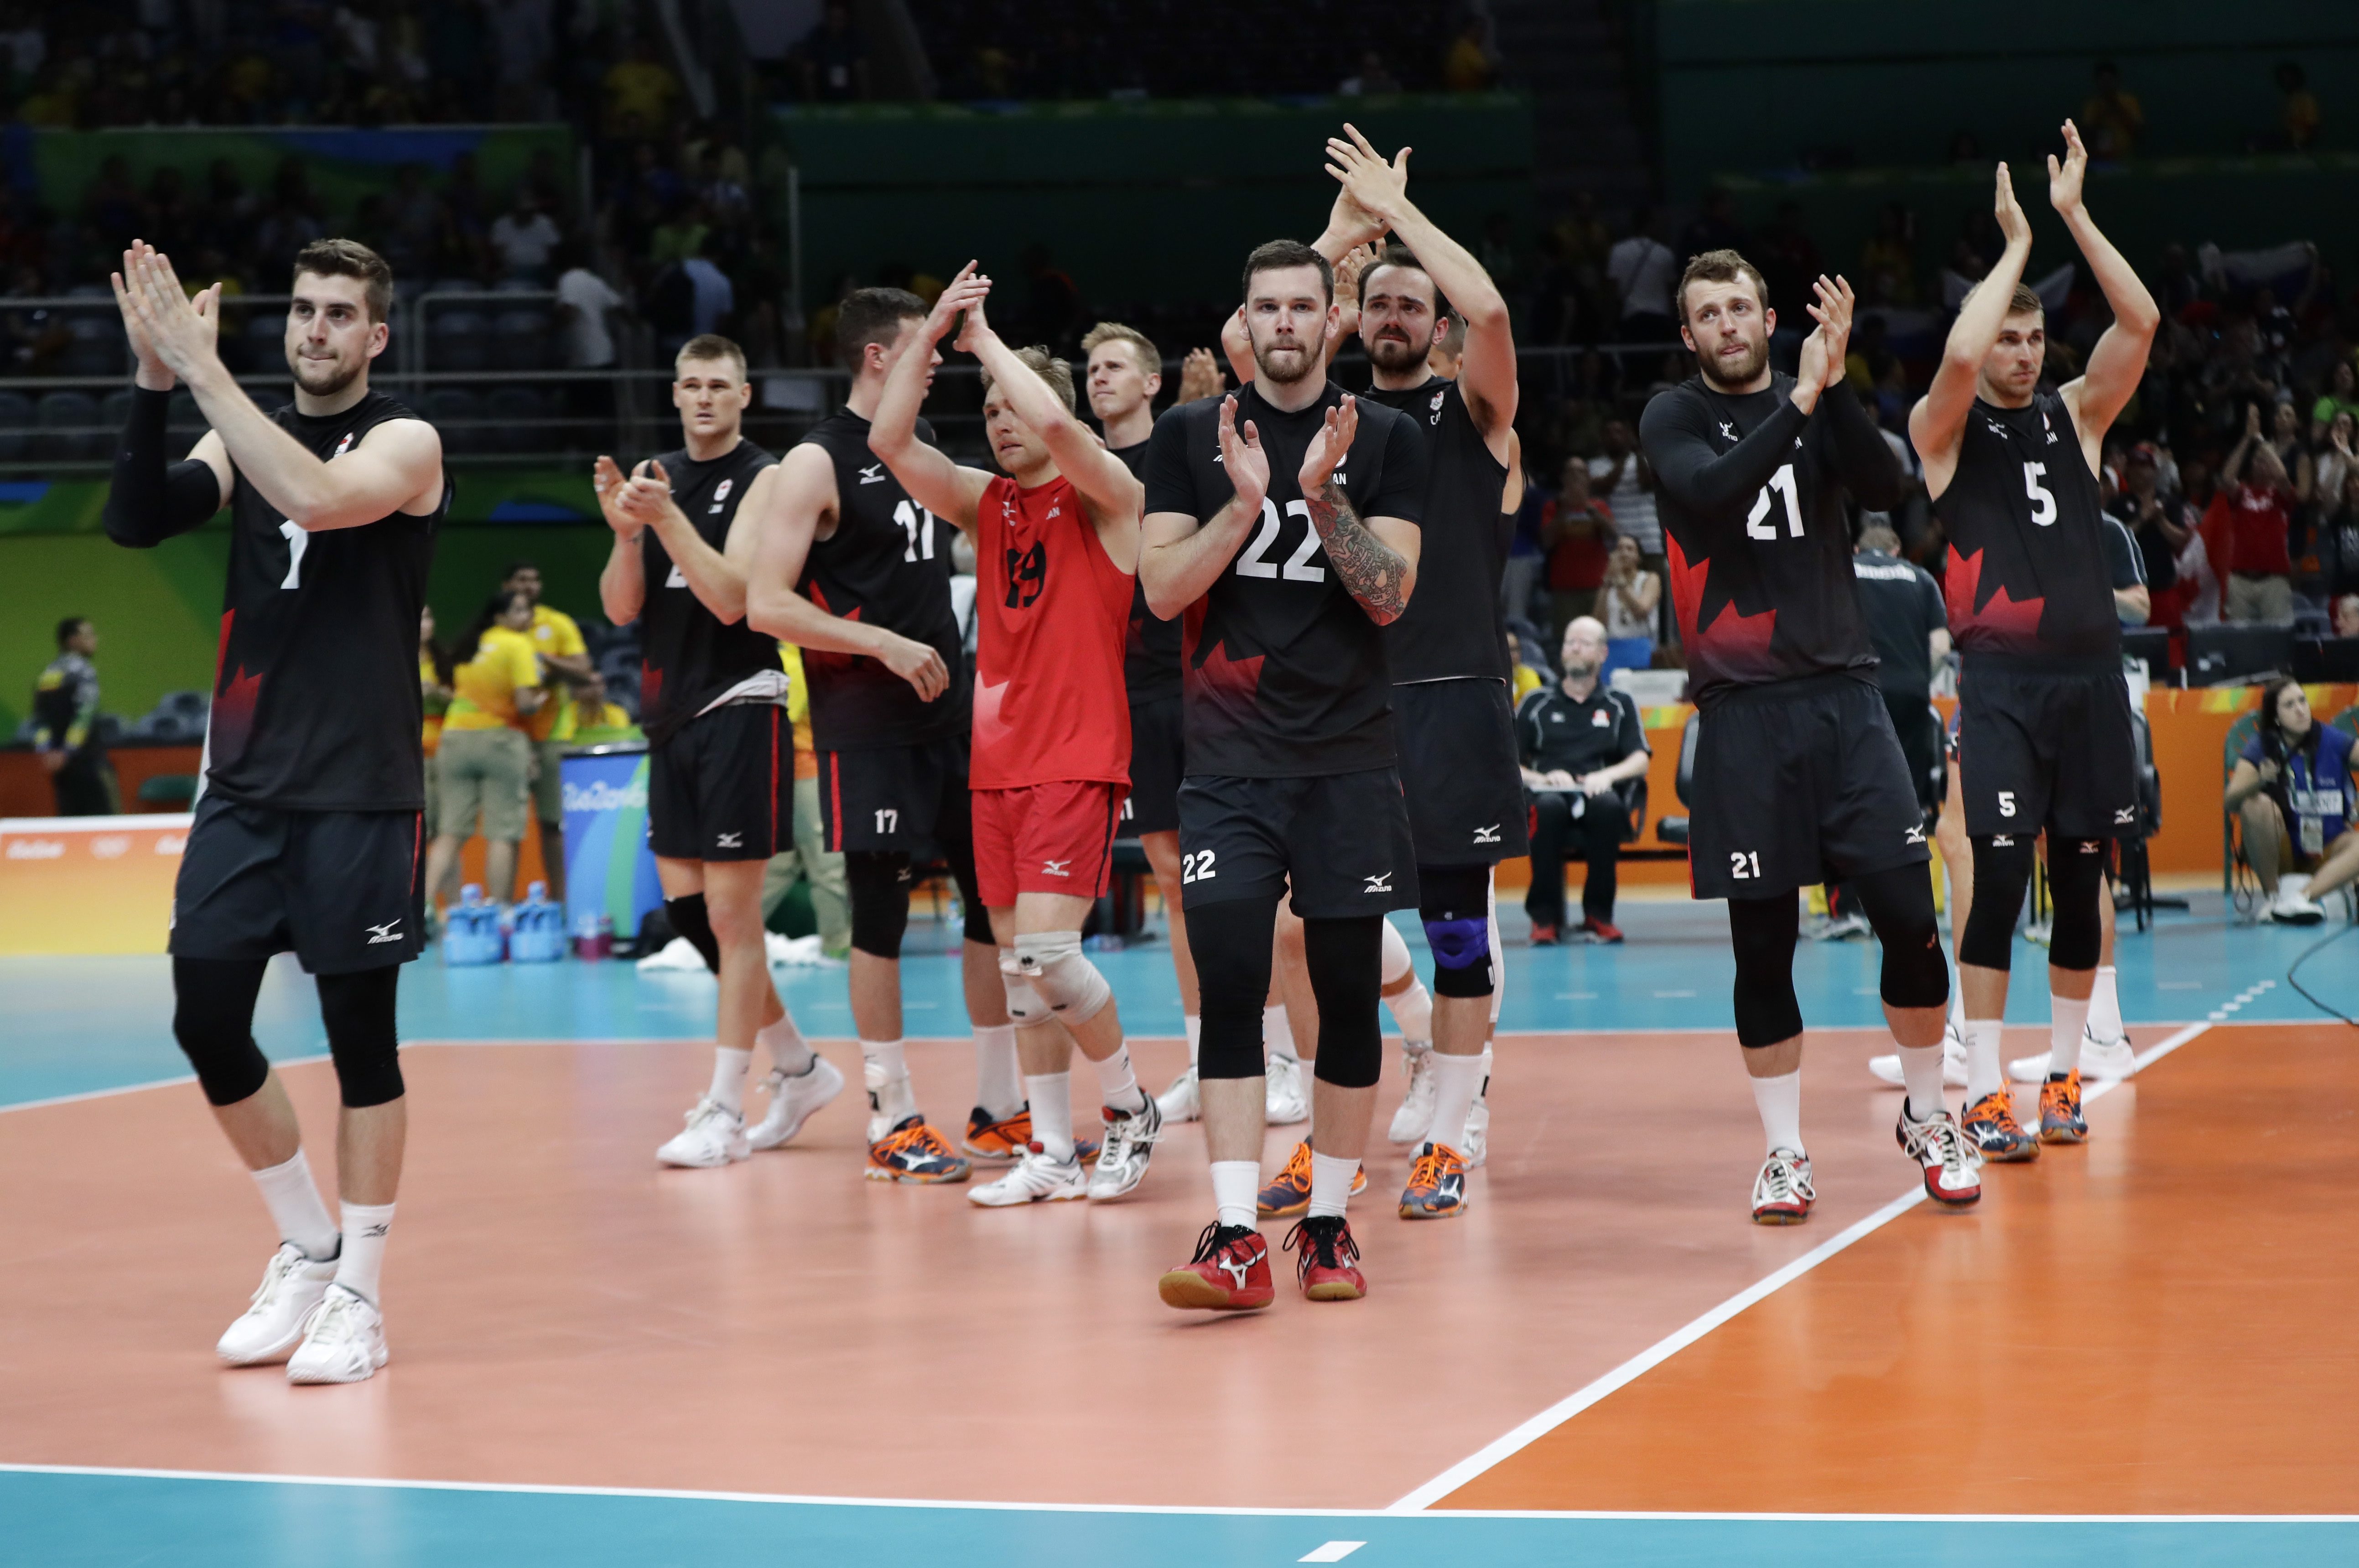 Canada's players applaud their fans after losing to Russia in straight sets in a men's quarterfinal volleyball match at the 2016 Summer Olympics in Rio de Janeiro, Brazil, Wednesday, Aug. 17, 2016. (AP Photo/Robert F. Bukaty)